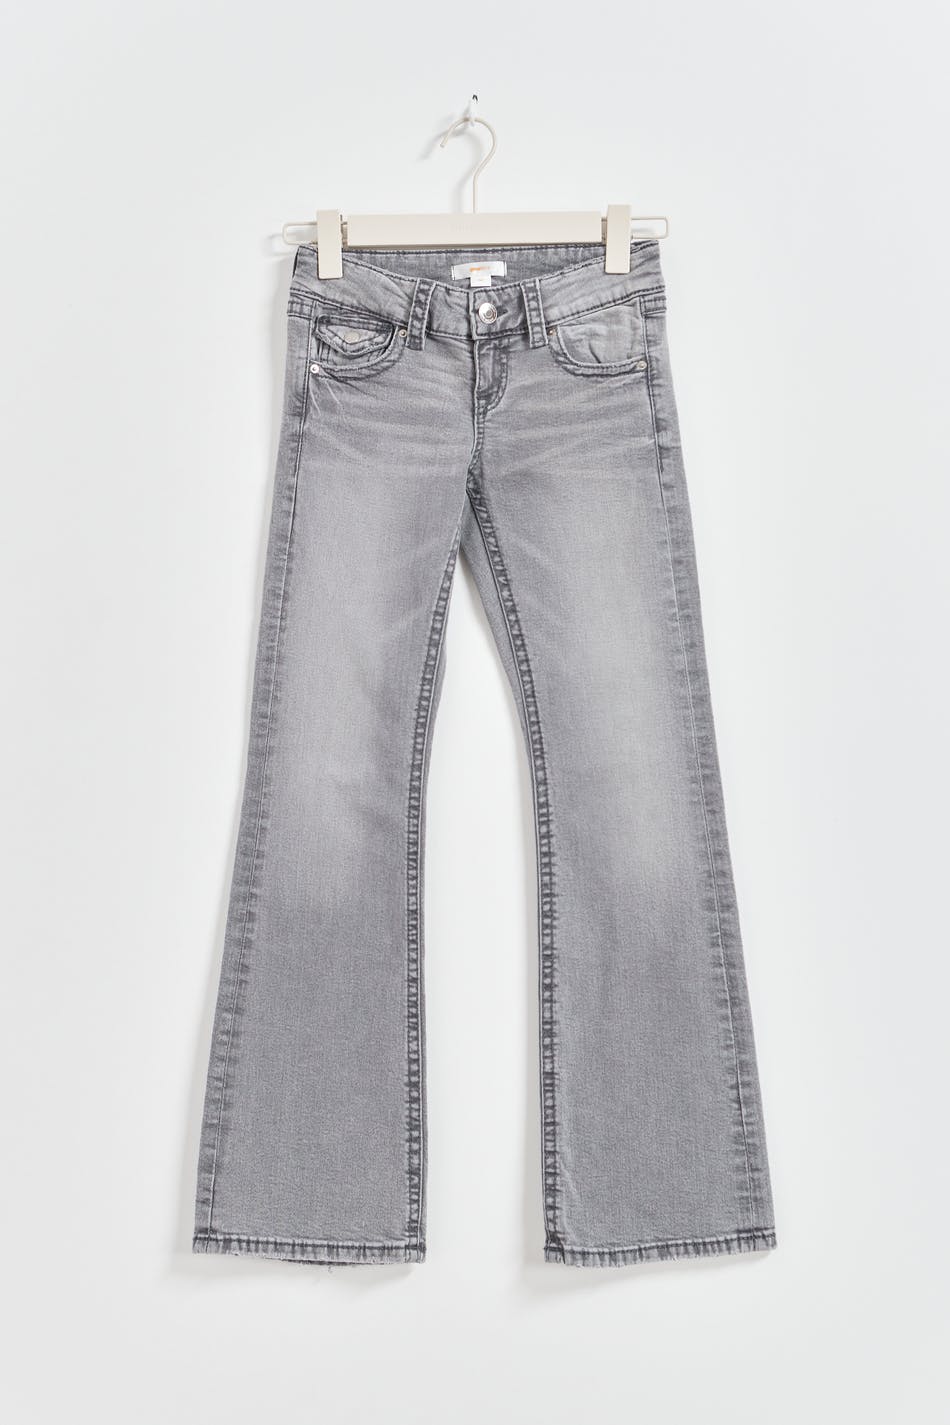 Gina Tricot - Chunky flare tall jeans - wide jeans- Grey - 158 - Female